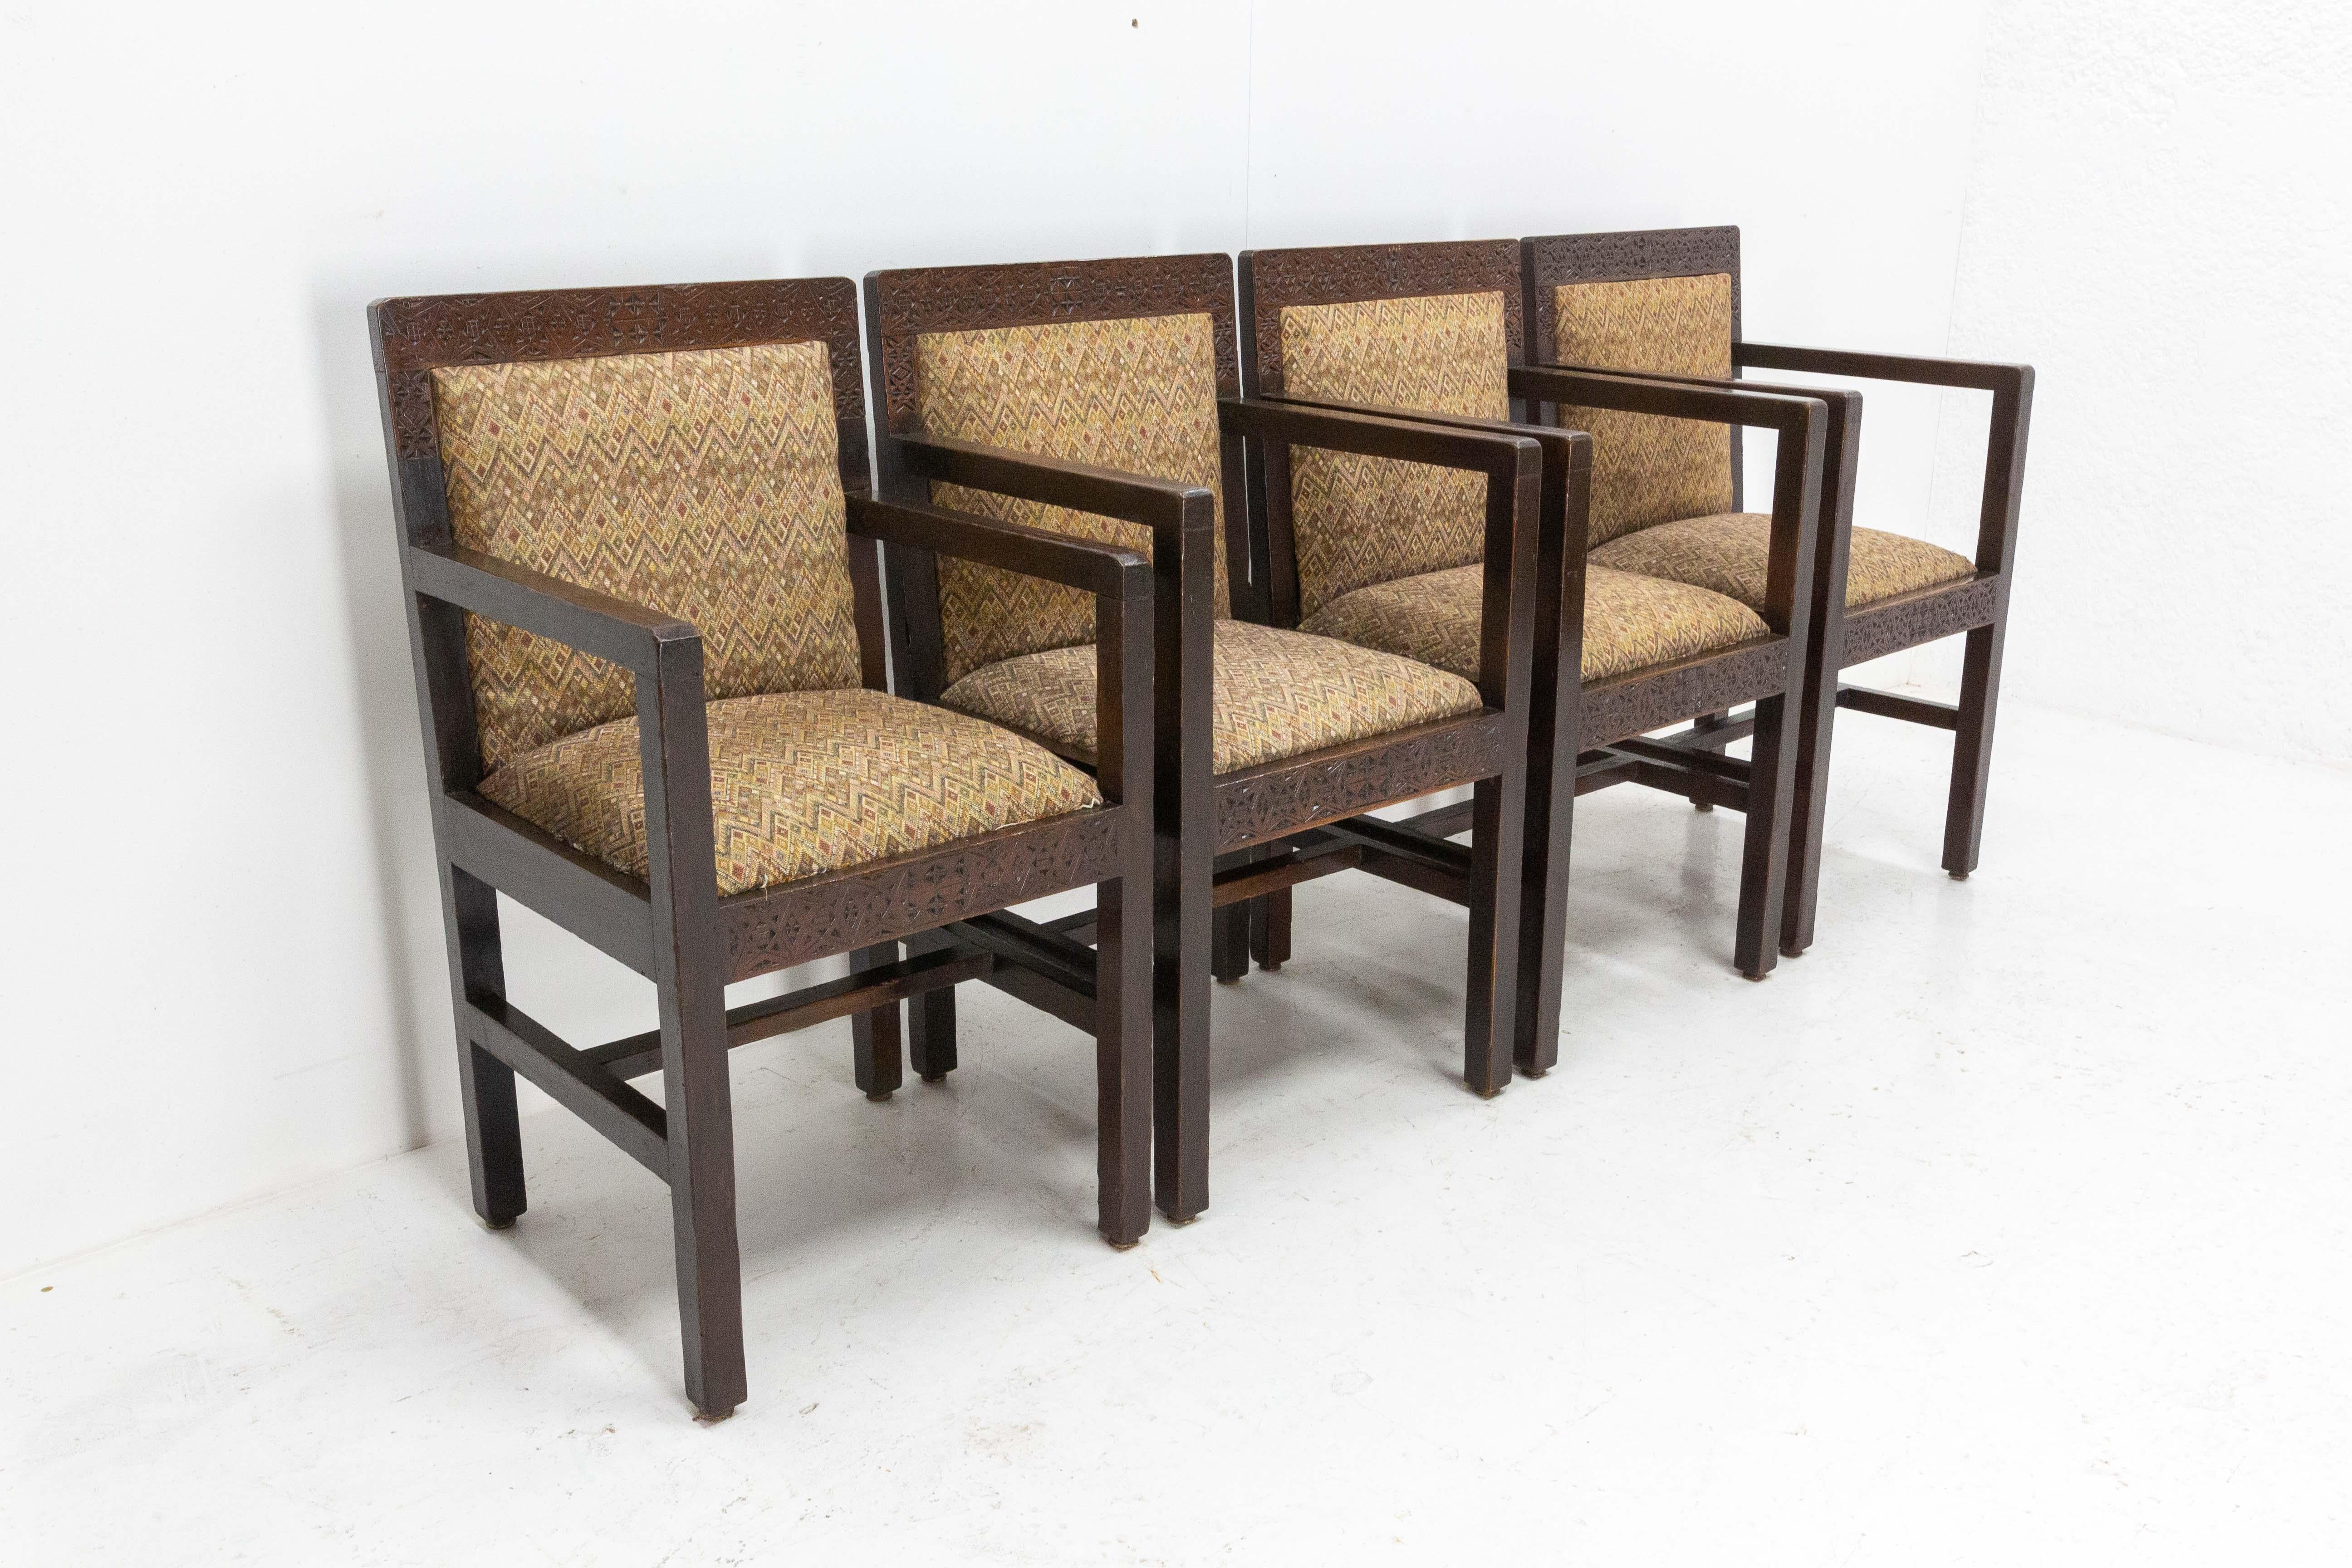 Pair of Moroccan Art Deco armchairs, circa 1930
One of the fauteuils has the particularity of having armrests lower than the others.
Original antique condition 
Frames are sound and solid, upholstery has to be changed.

Shipping:
L119 P55 H123